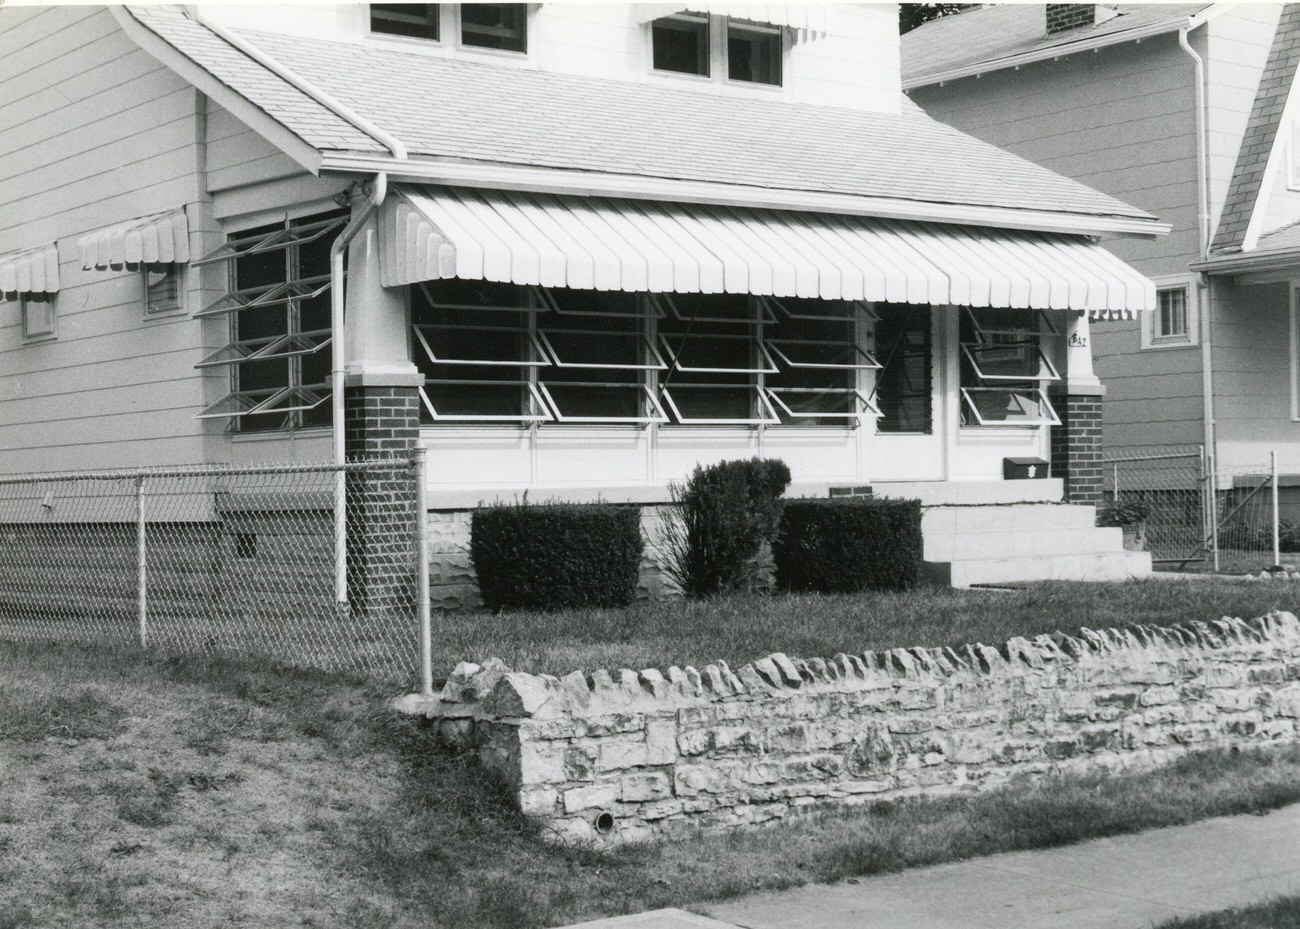 642 S. Terrace Ave. in Hilltop, featured in the Greater Hilltop Area Commission's guide, 1980s.